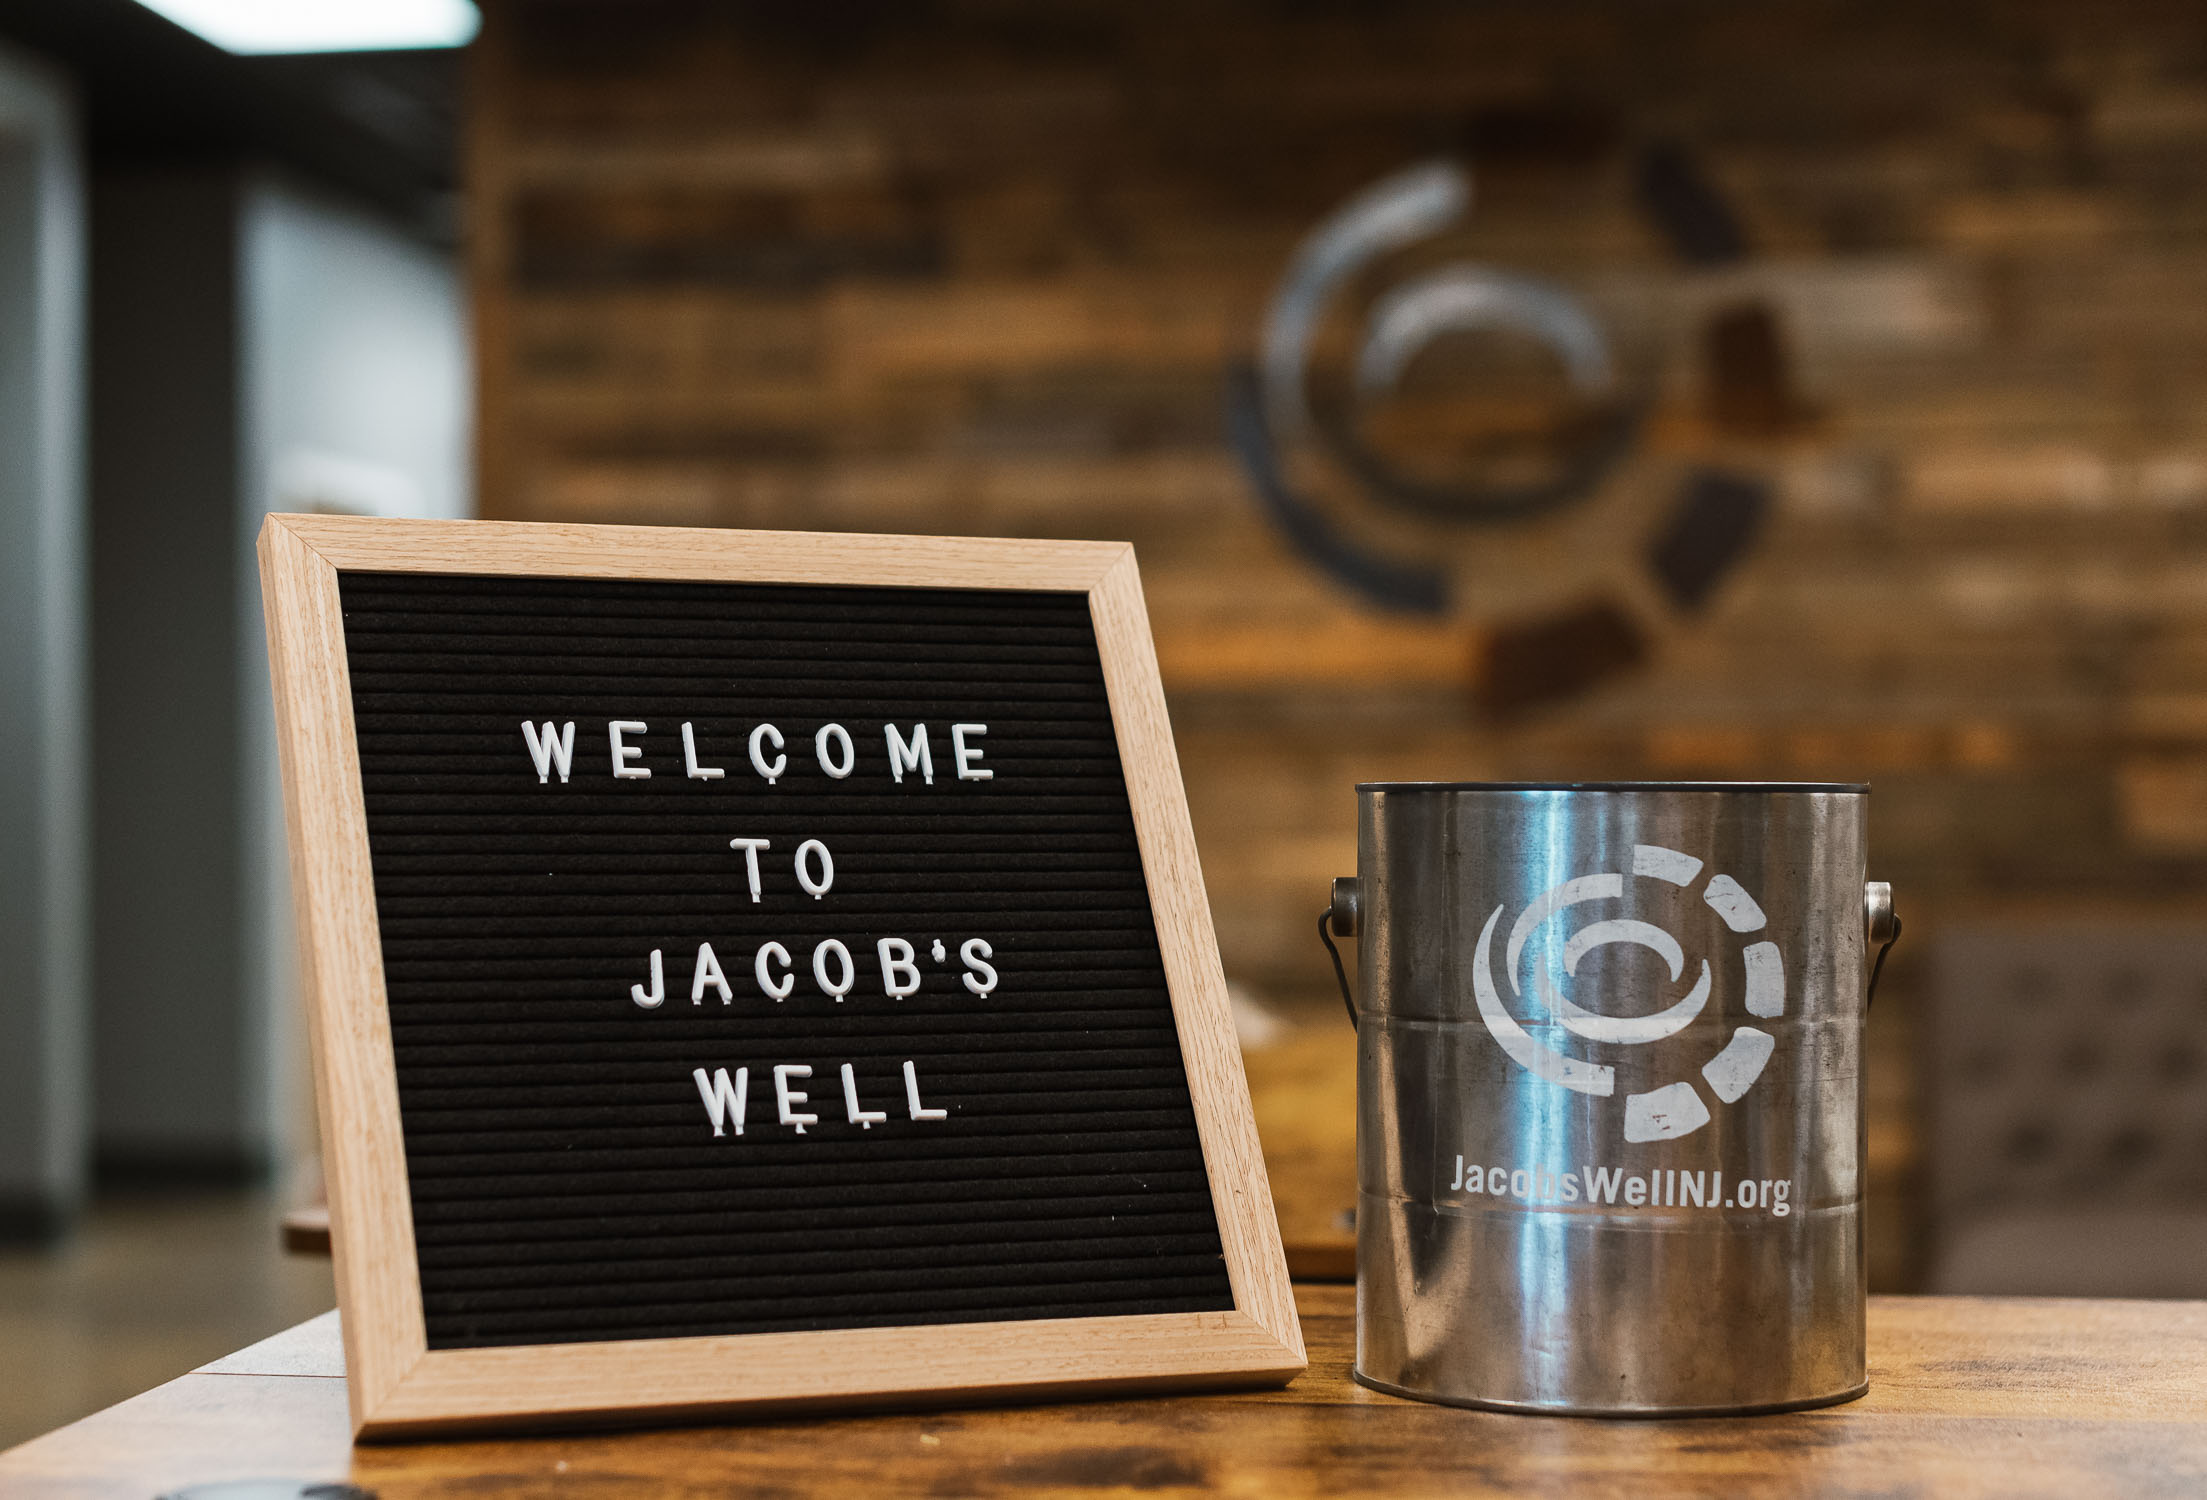 Jacob's Well Community Church, Welcome-1 image